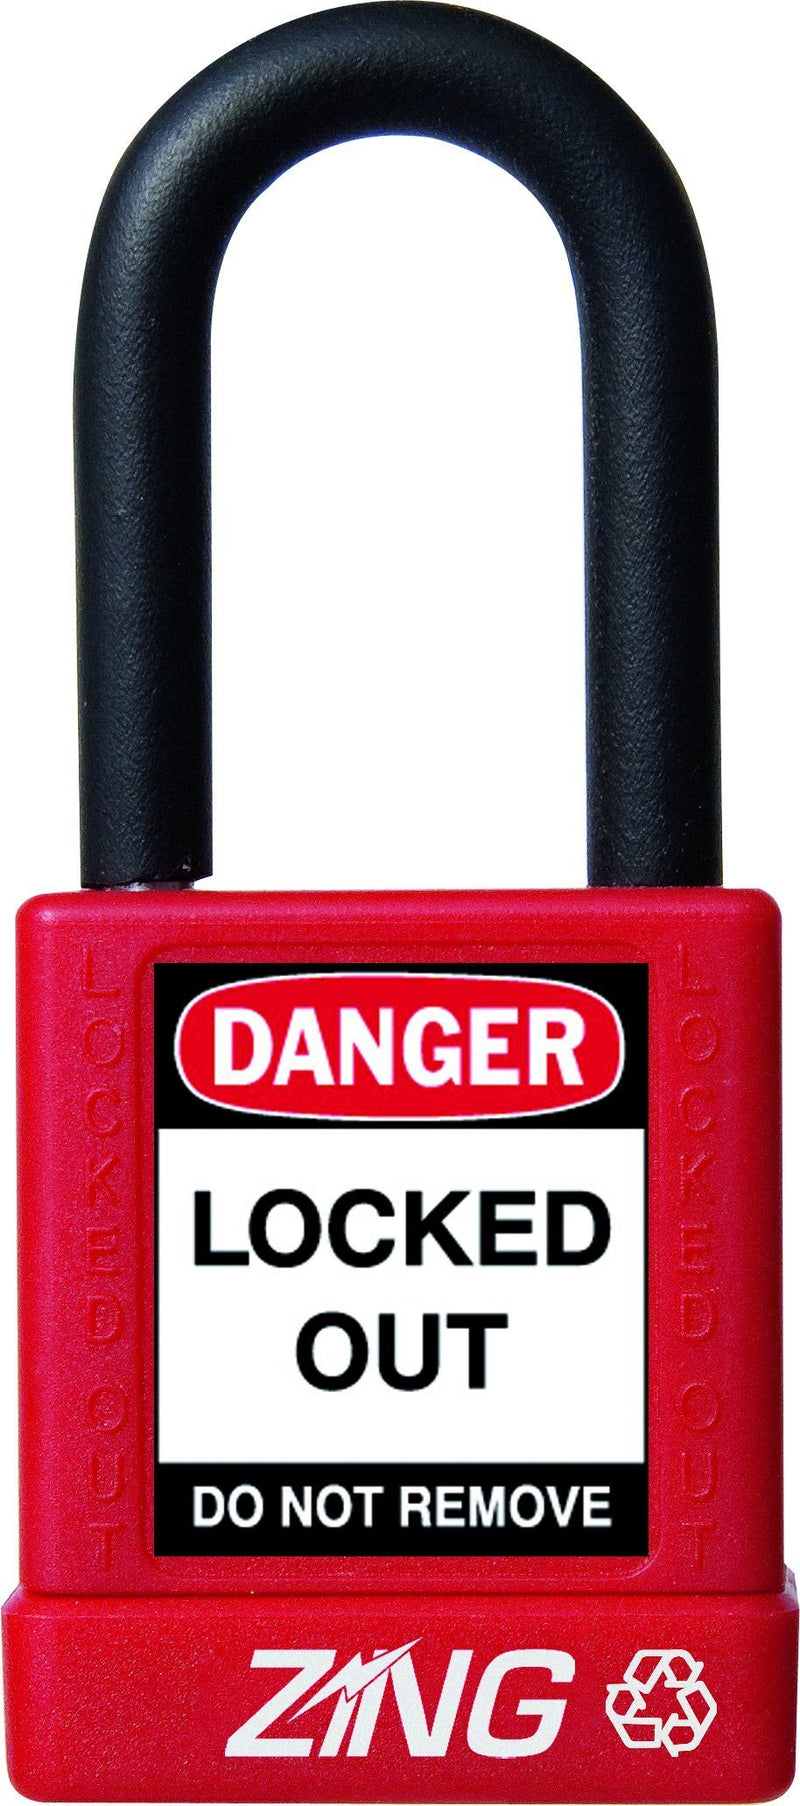 ZING 7030 RecycLock Safety Padlock, Keyed Different, 1-1/2" Shackle, 1-3/4" Body, Red 1.5" Shackle